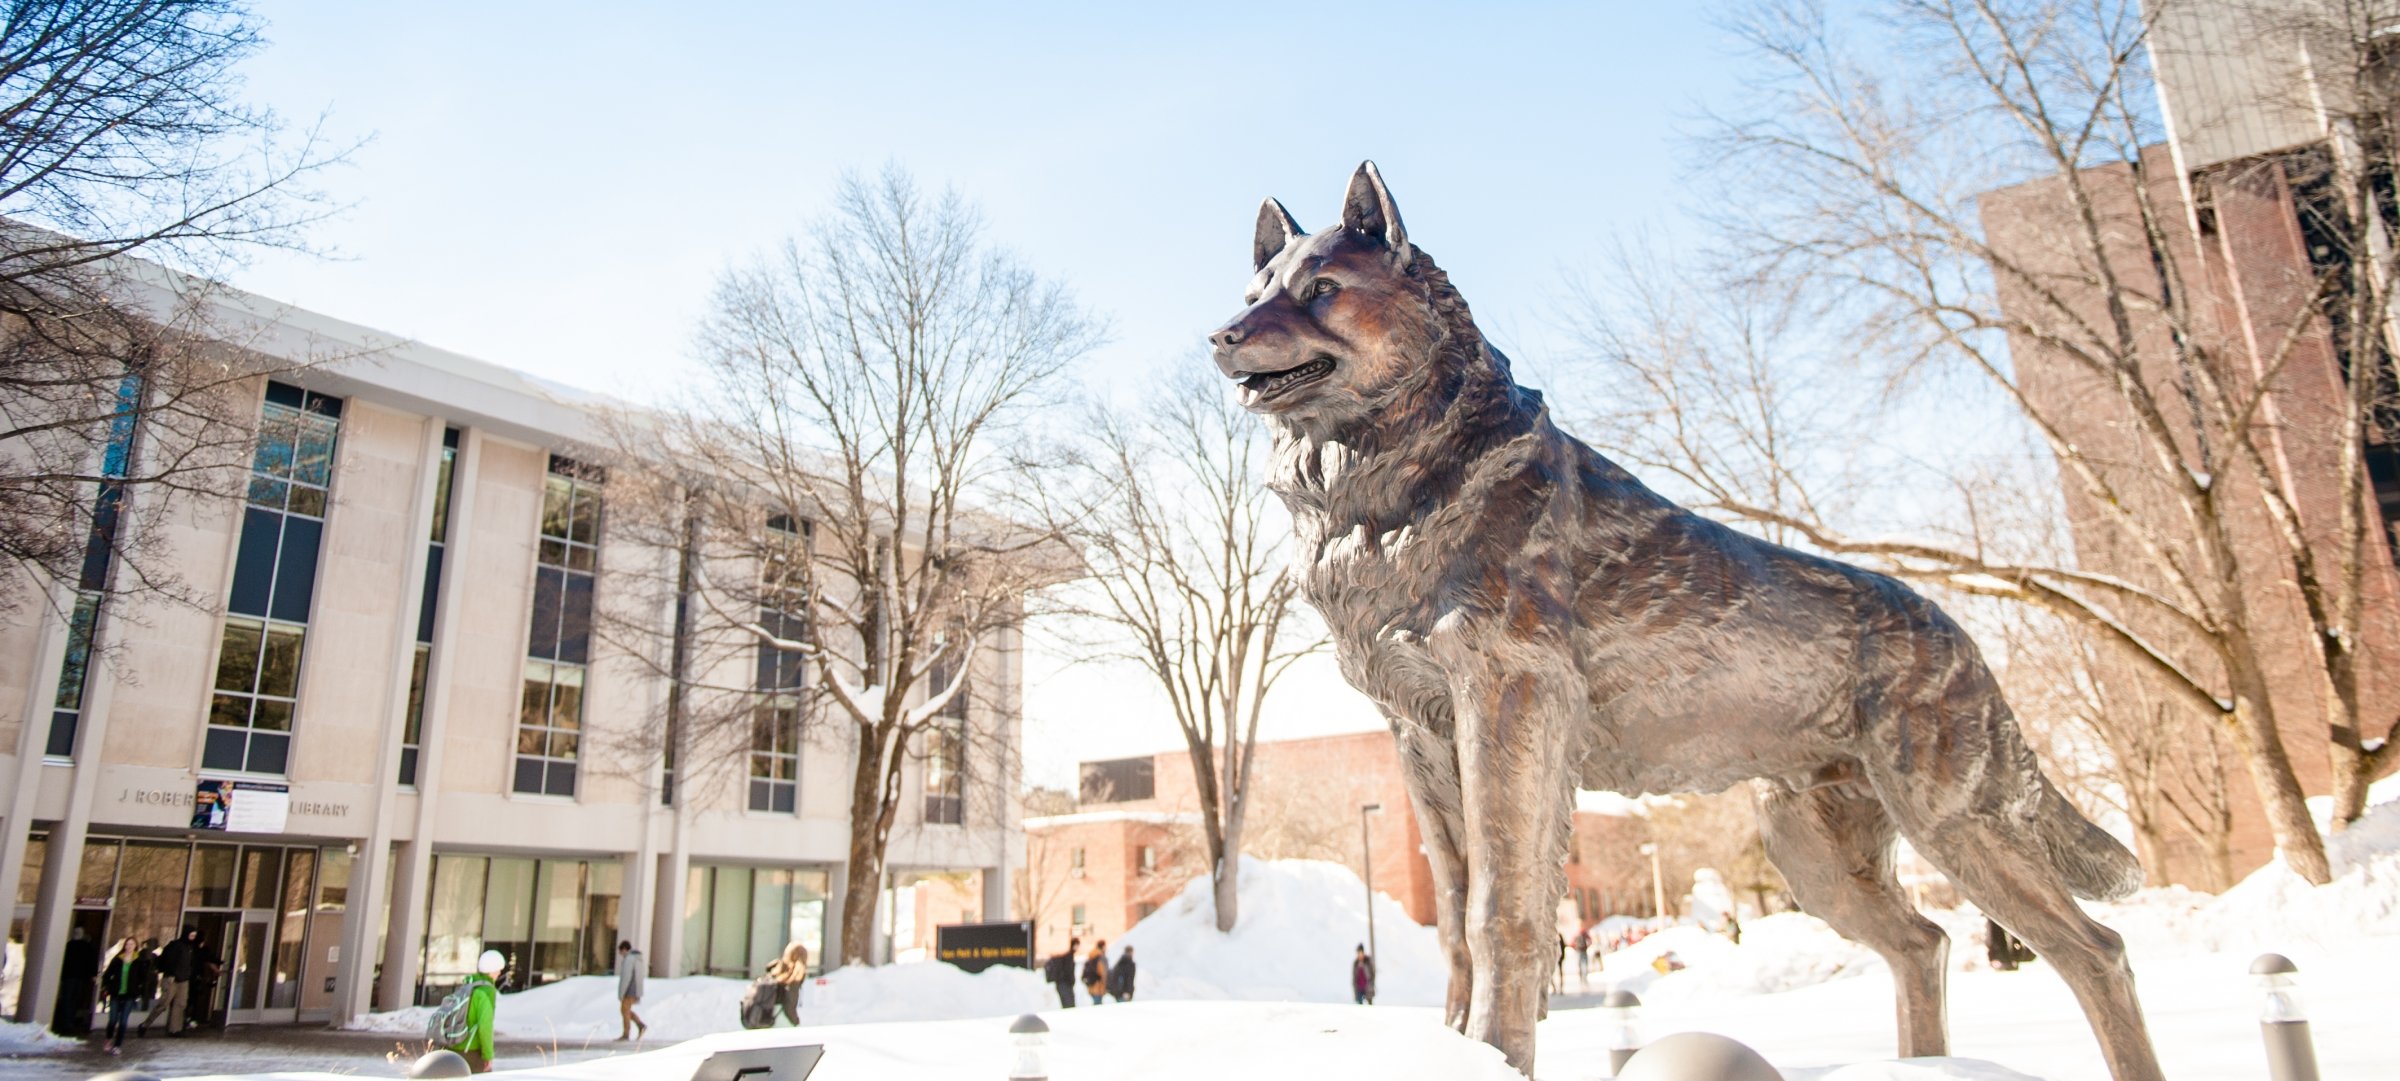 Students walk across campus in the snow. Husky statue in the winter.